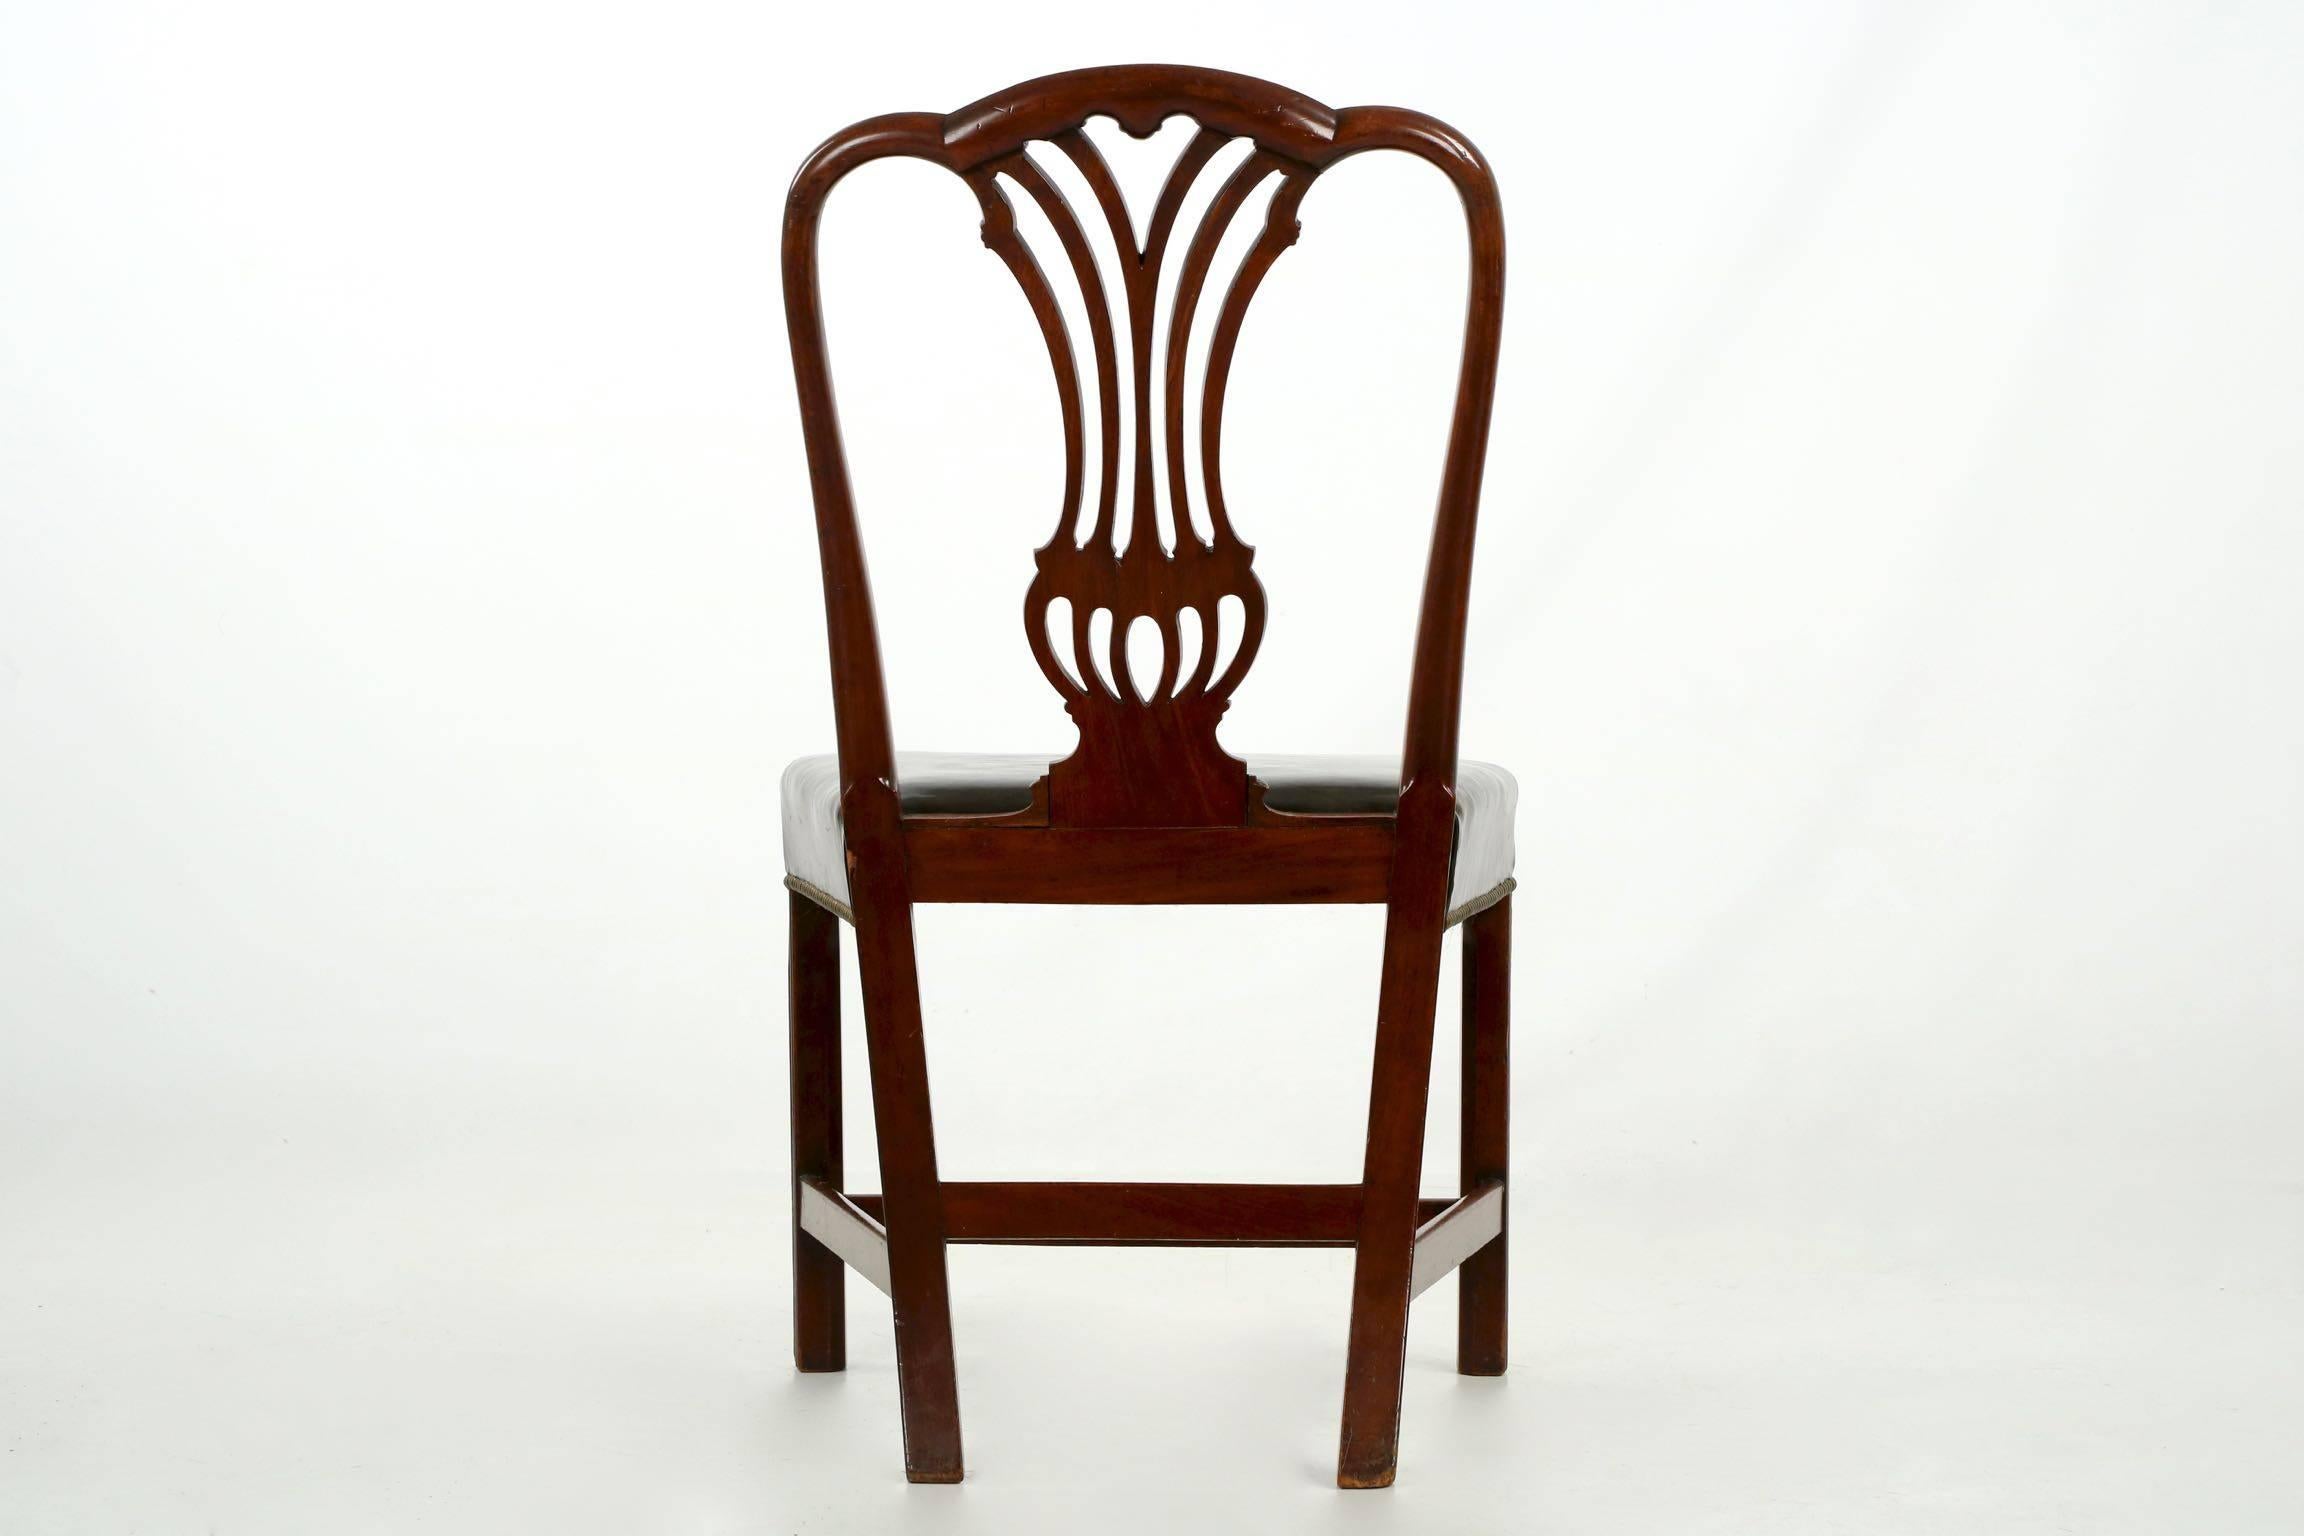 Carved English Georgian Period Antique Mahogany Side Chair, Late 18th Century